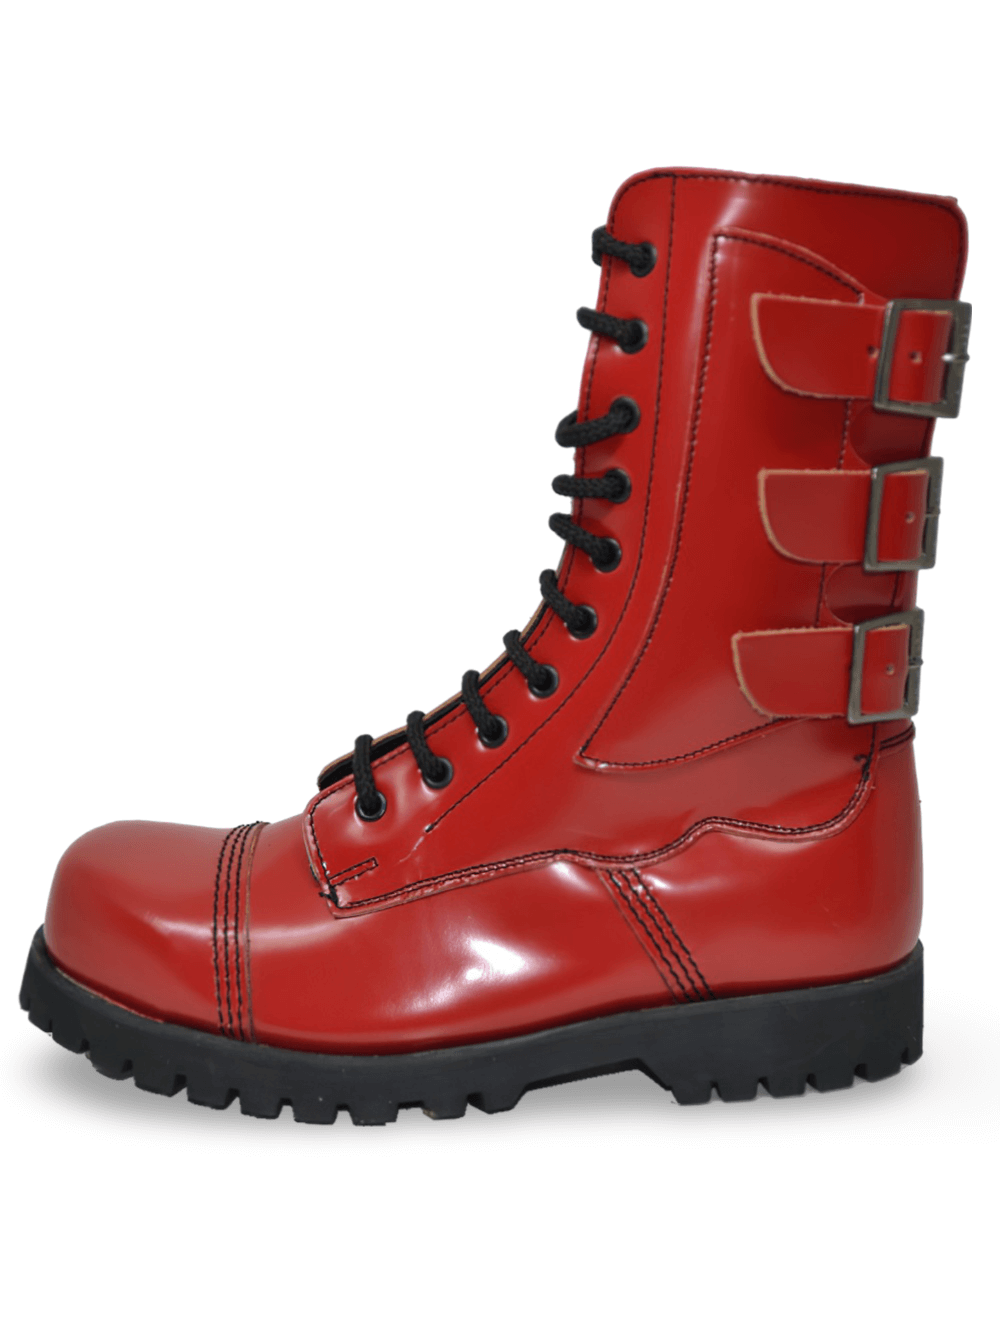 Red Leather Ranger Boots with Laces and Buckles